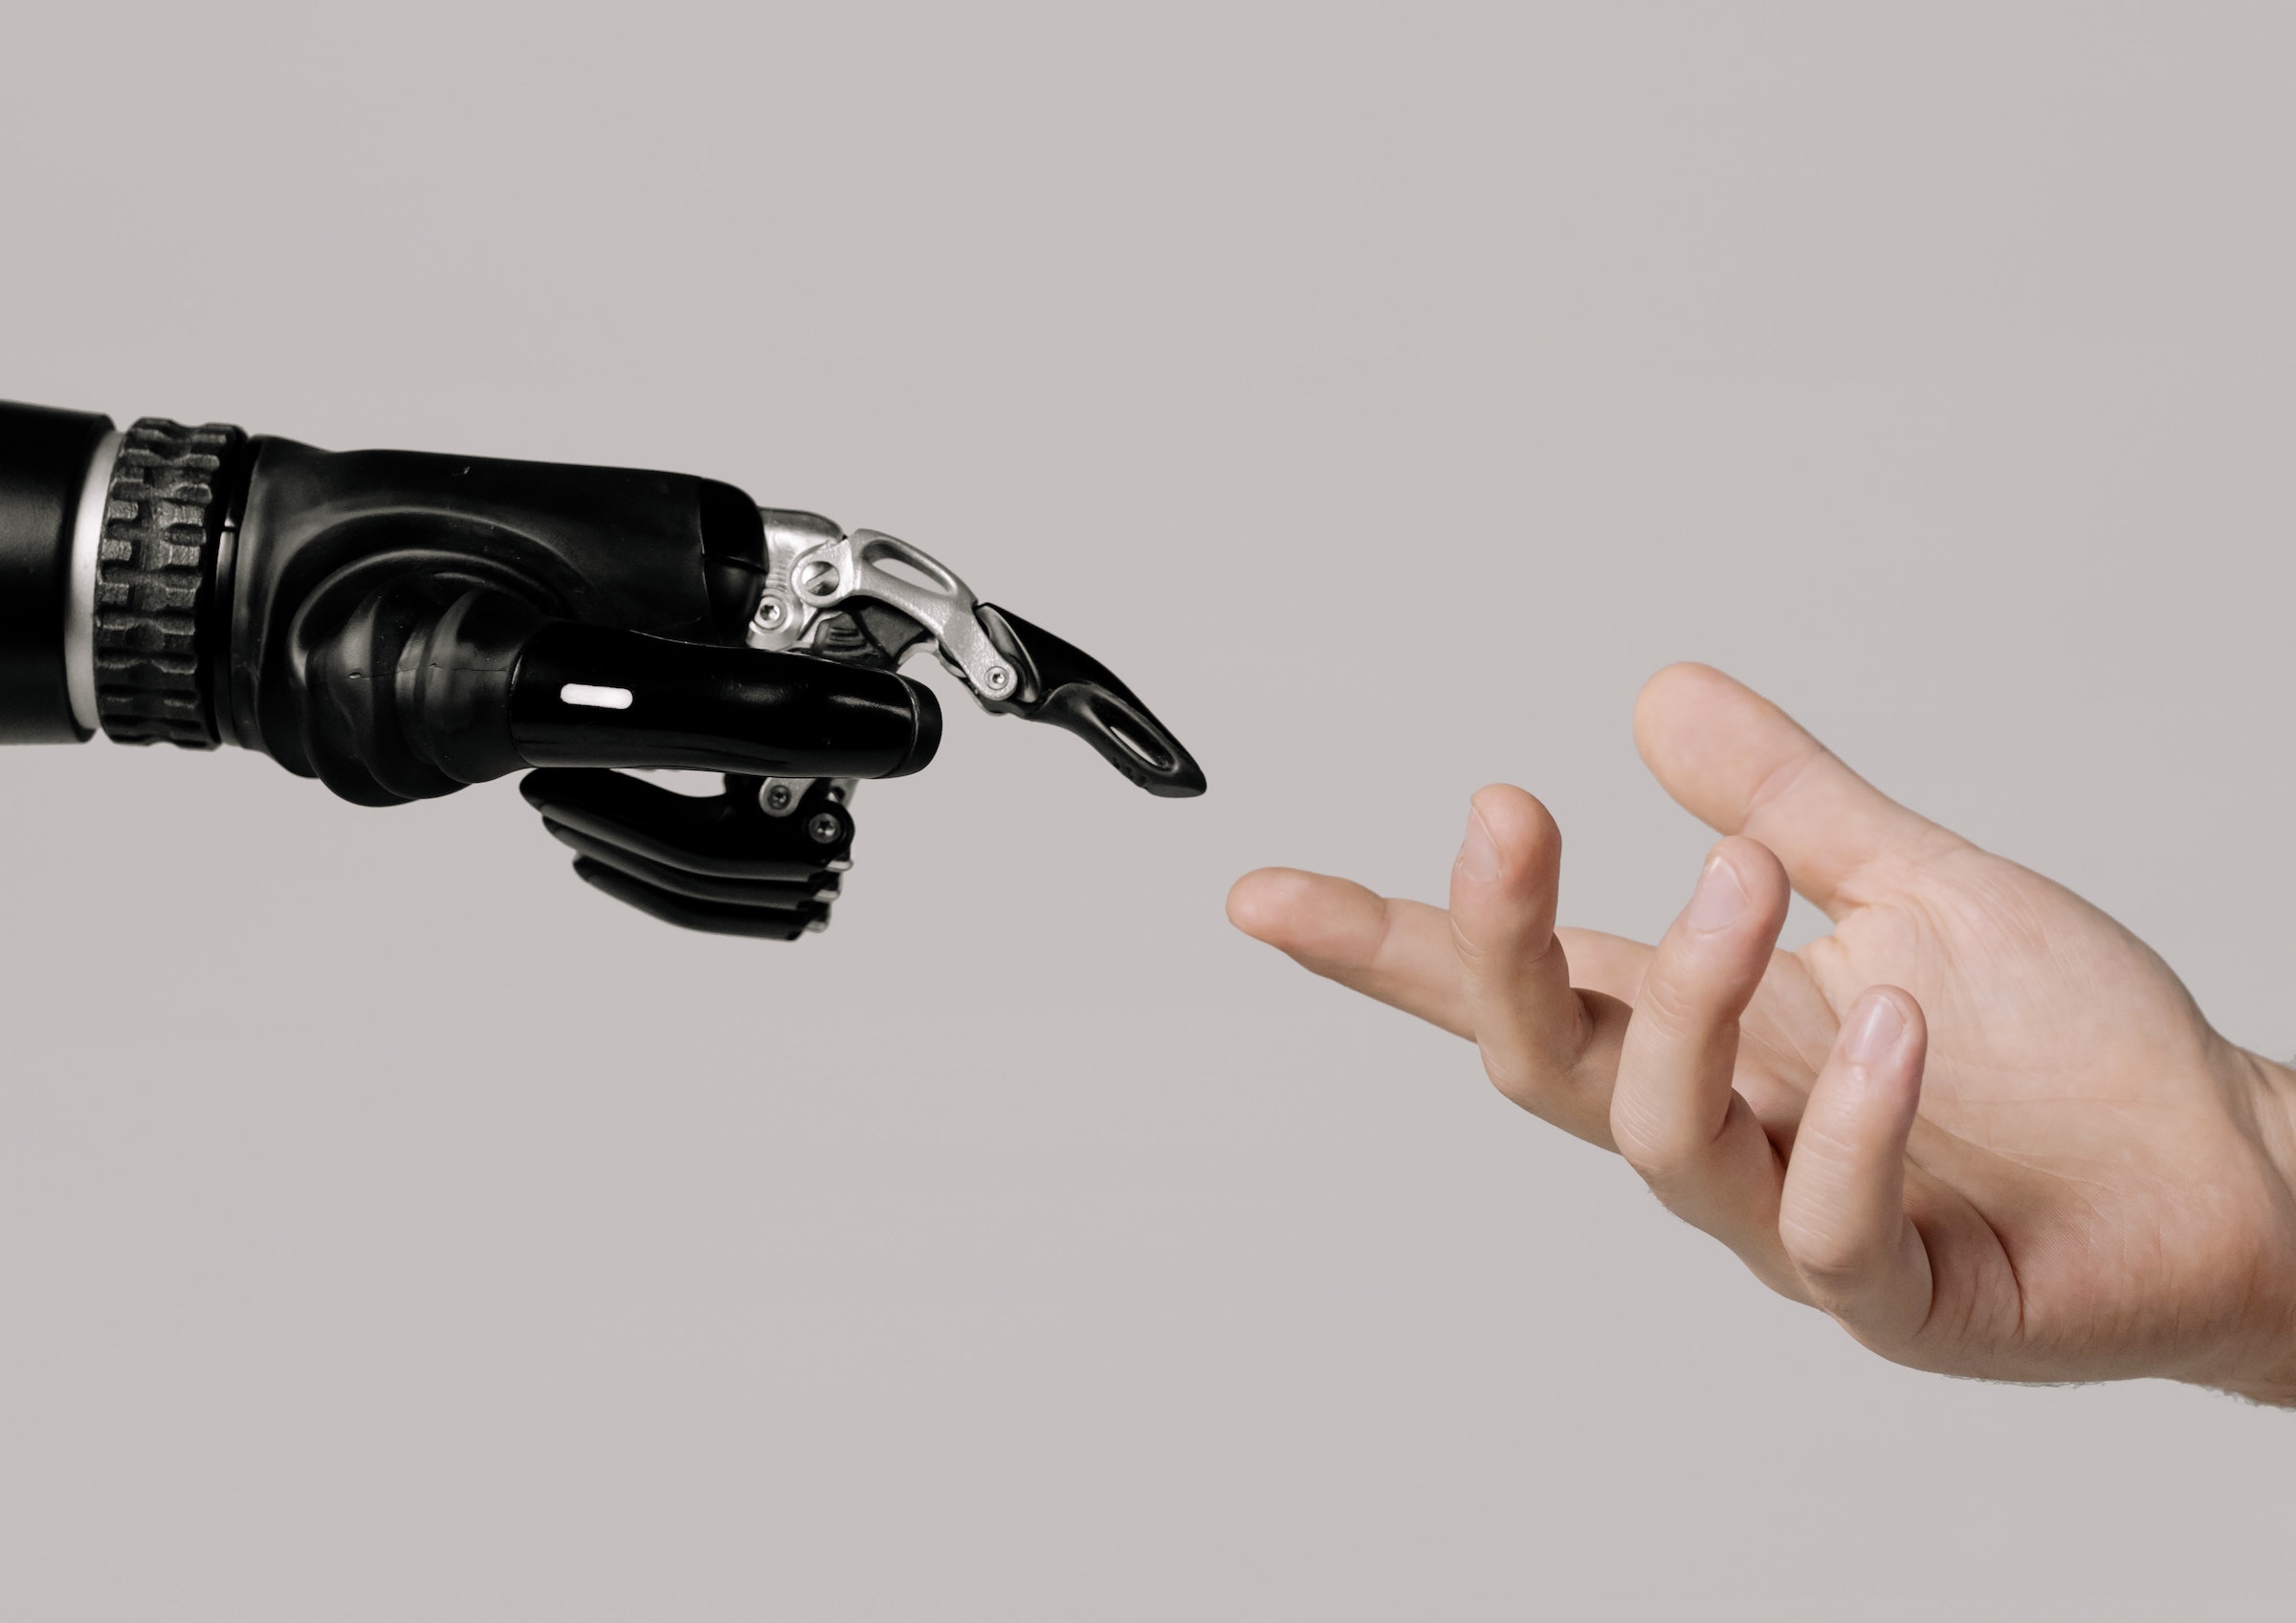 Robot hand touching human hand in the style of the creation of Adam